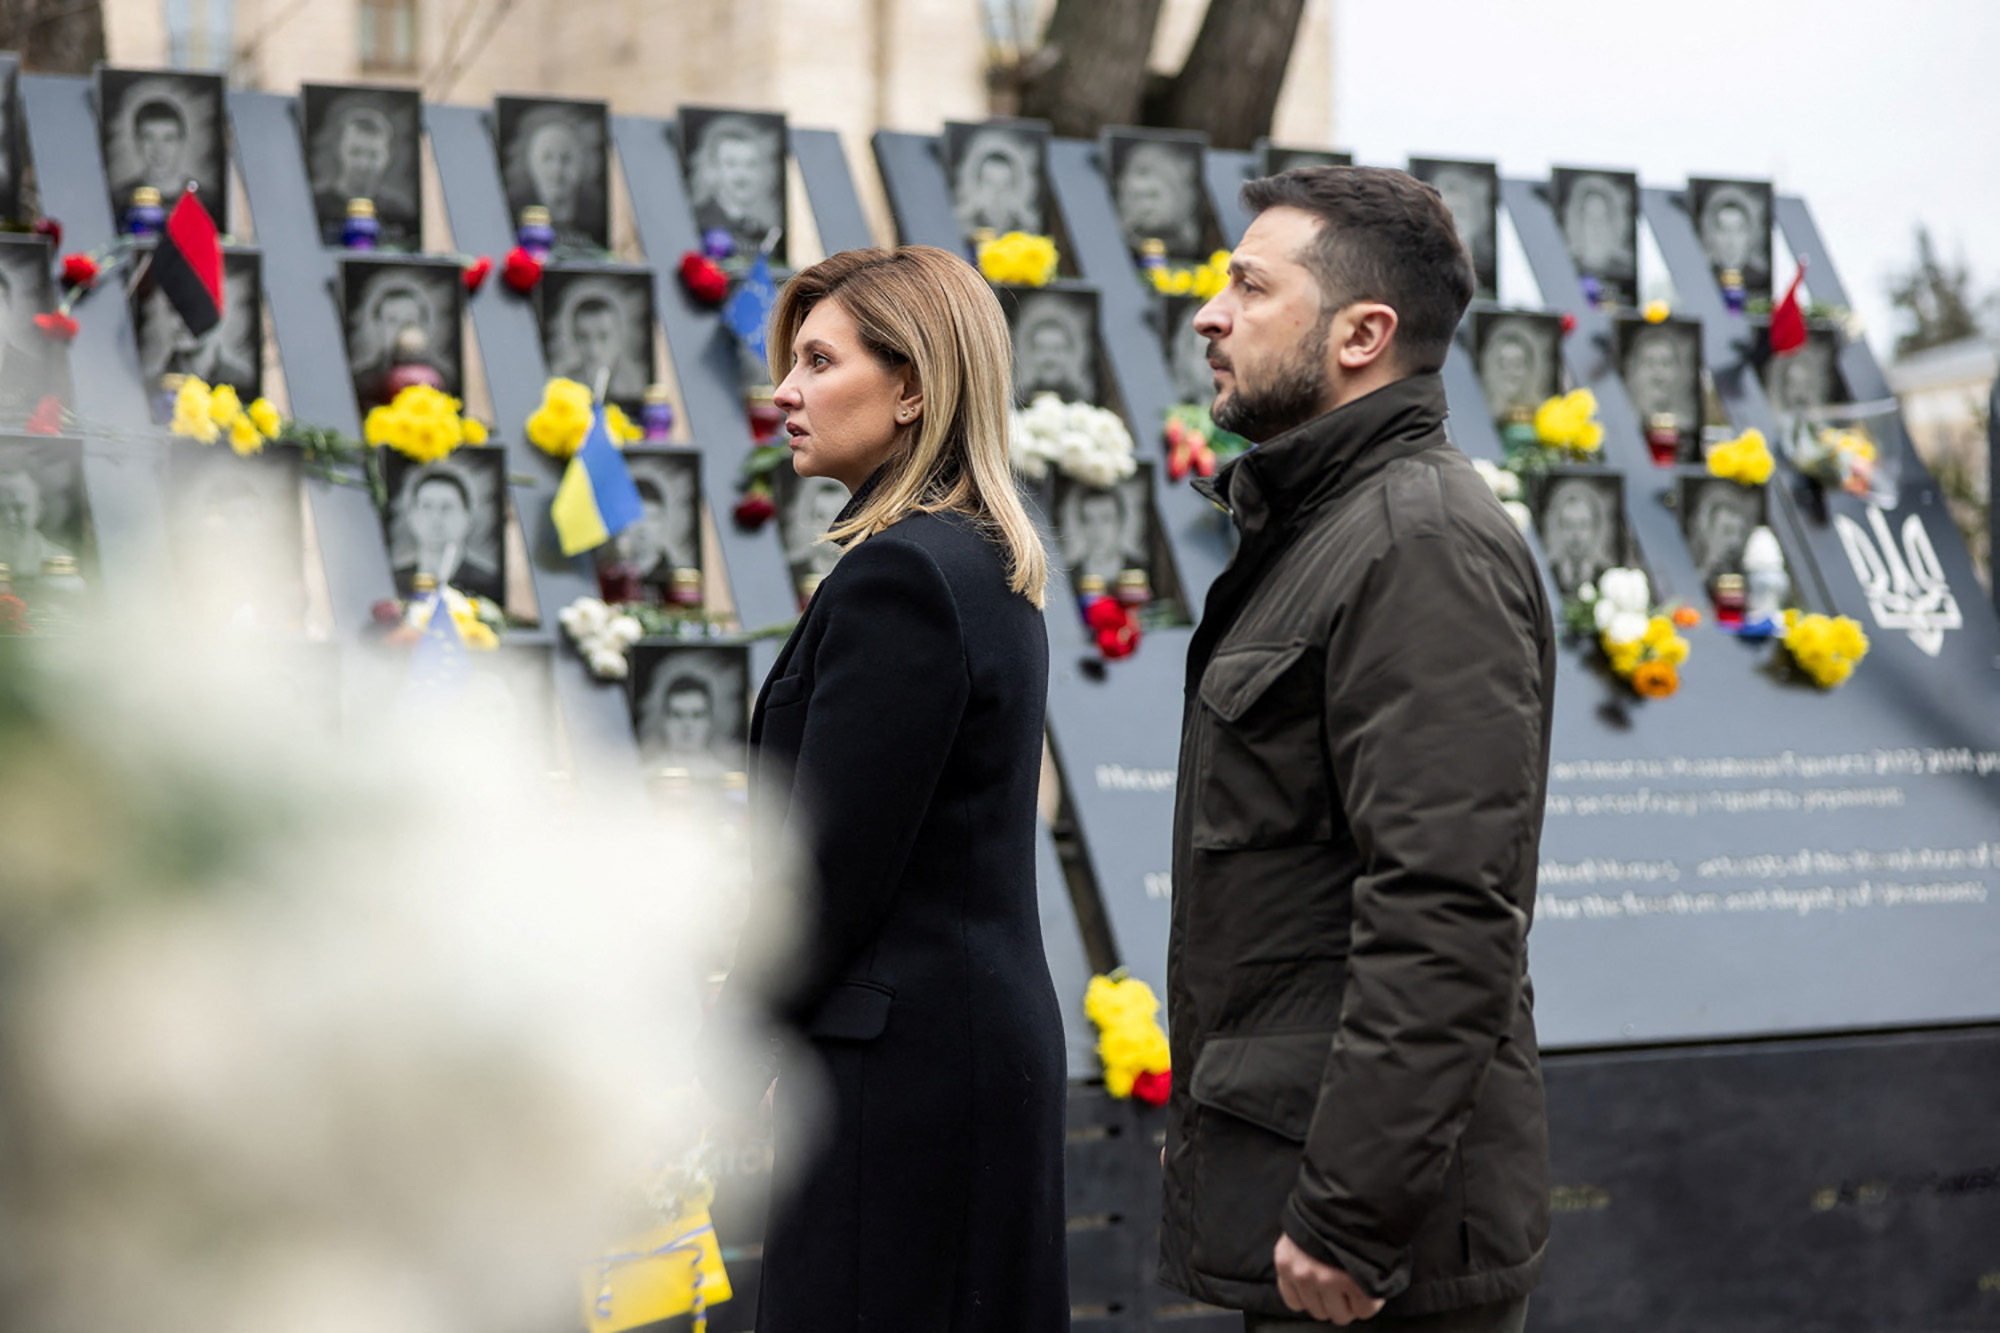 Ukraine's President Volodymyr Zelensky and his wife Olena attend a commemoration ceremony at a monument "Heavenly Hundred", the people killed during the Ukrainian pro-European Union (EU) mass demonstrations in 2014, in Kyiv, Ukraine, on February 20.